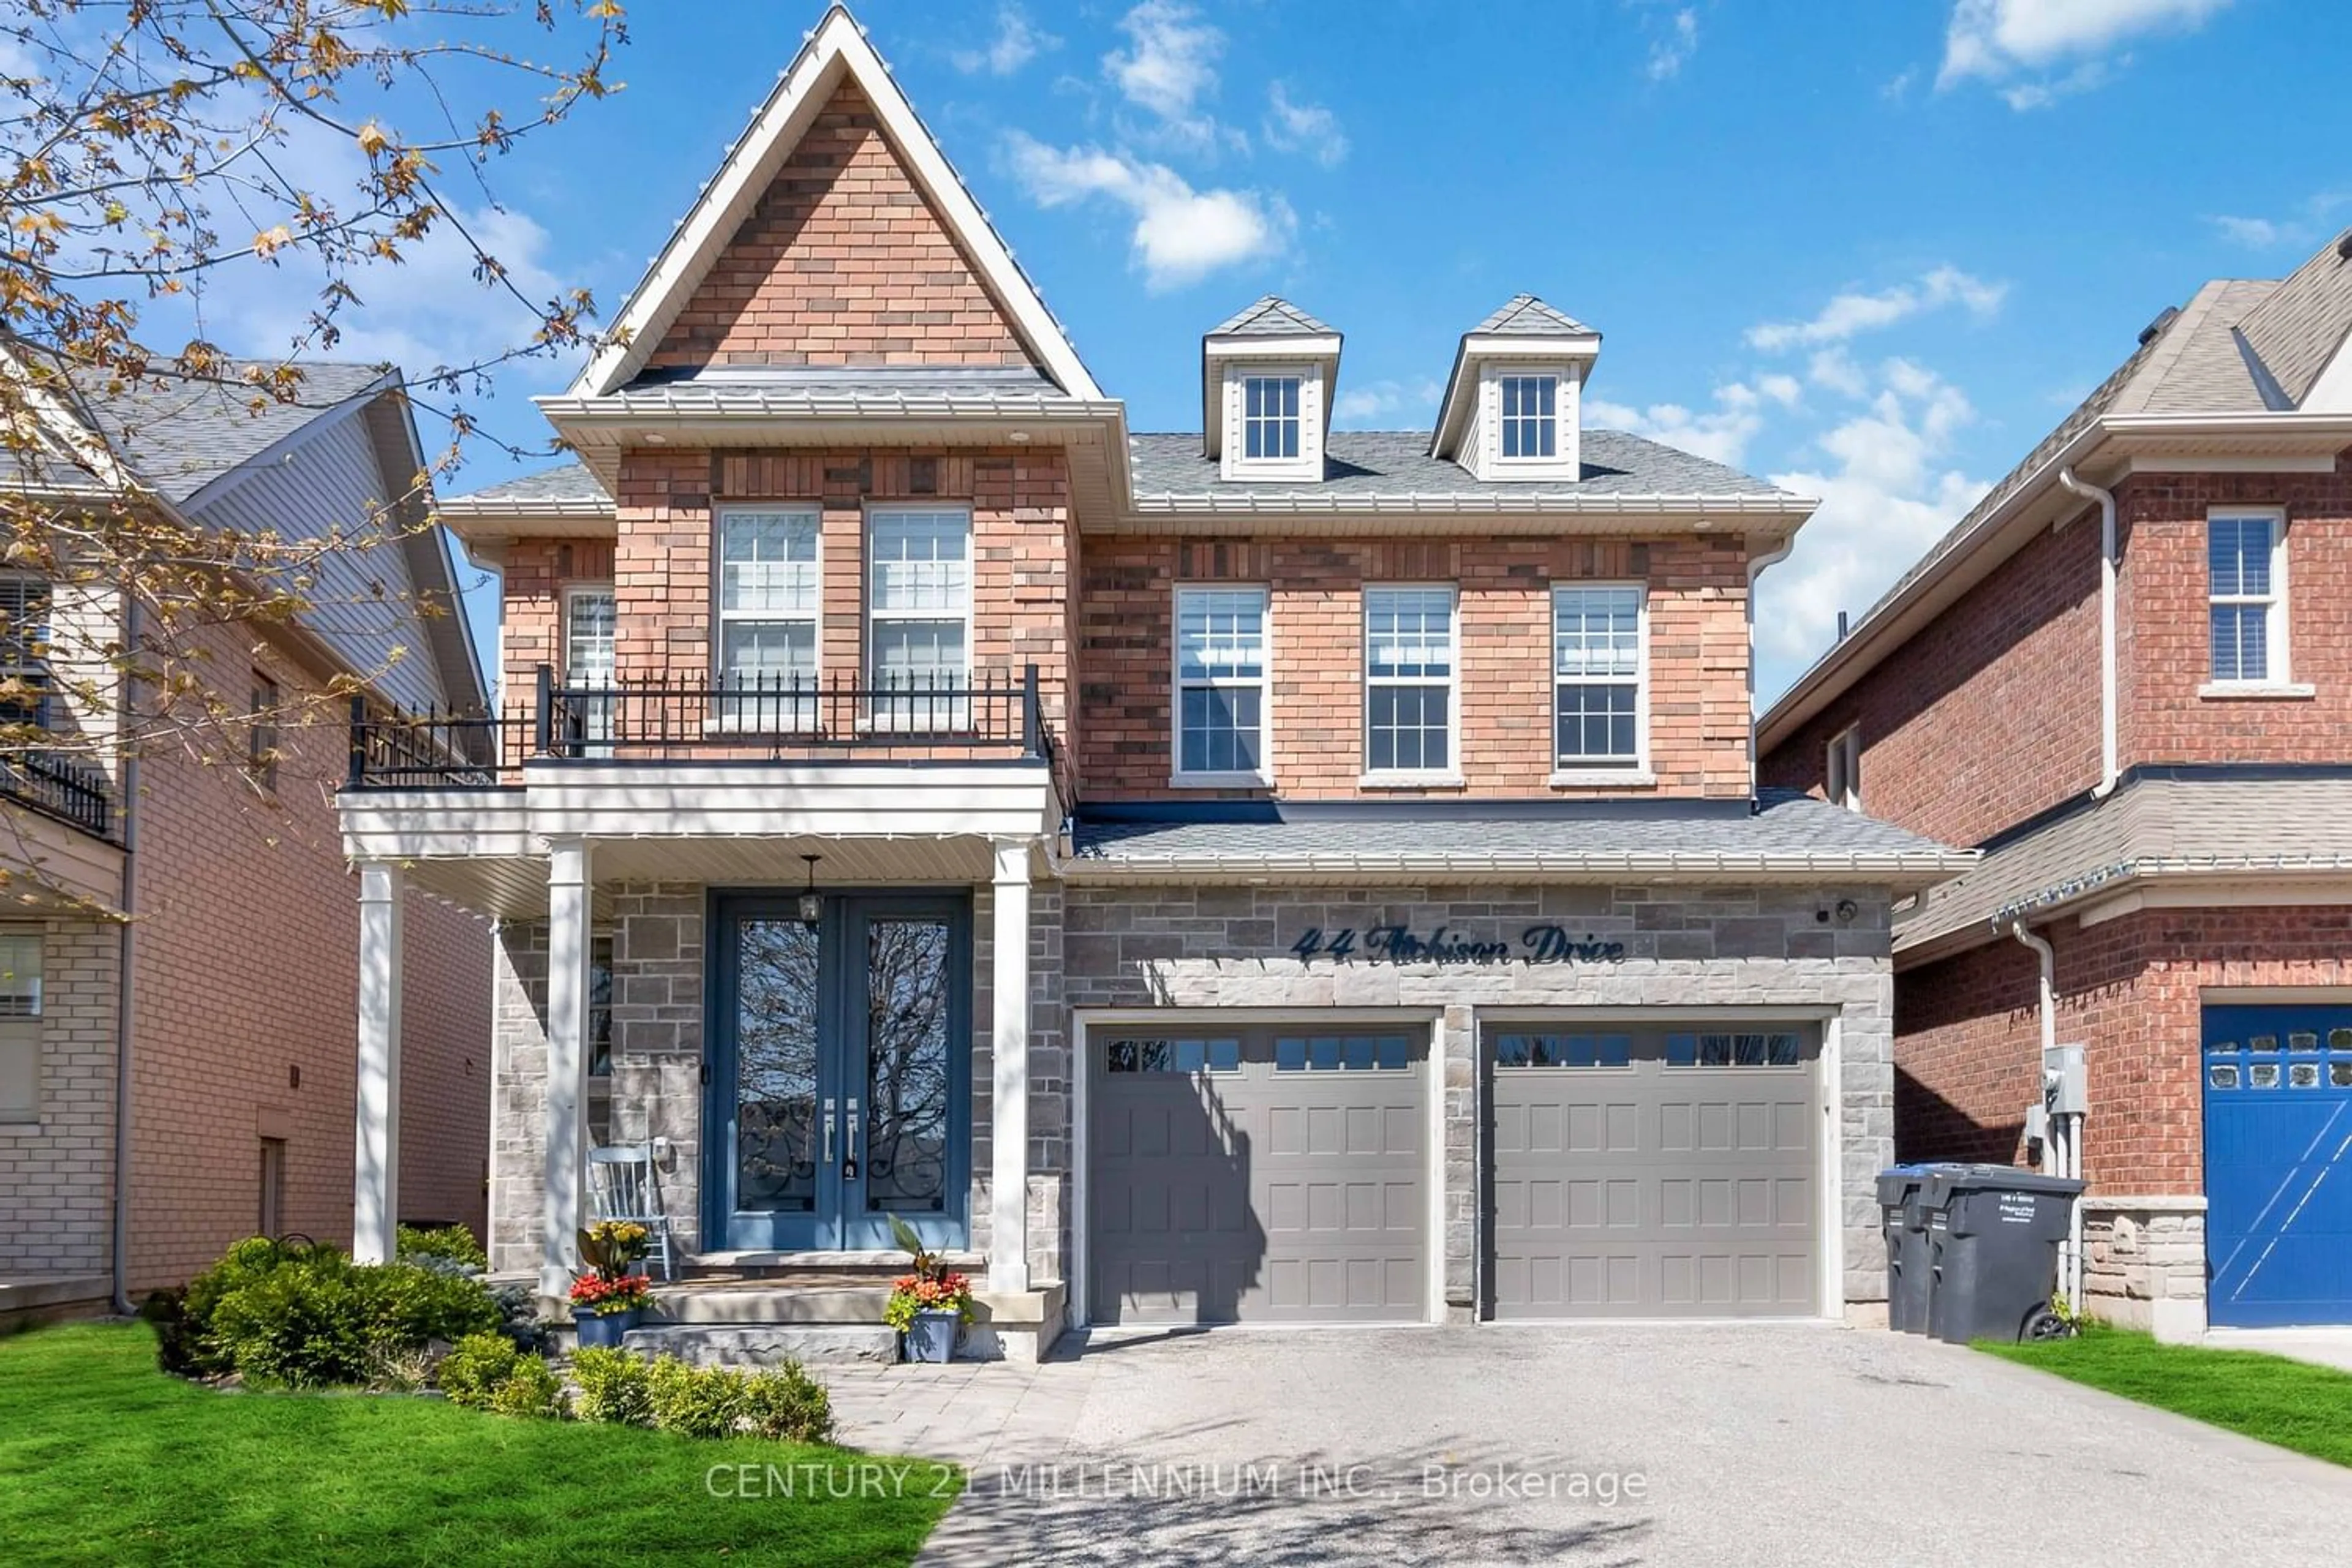 Home with brick exterior material for 44 Atchison Dr, Caledon Ontario L7C 3R5